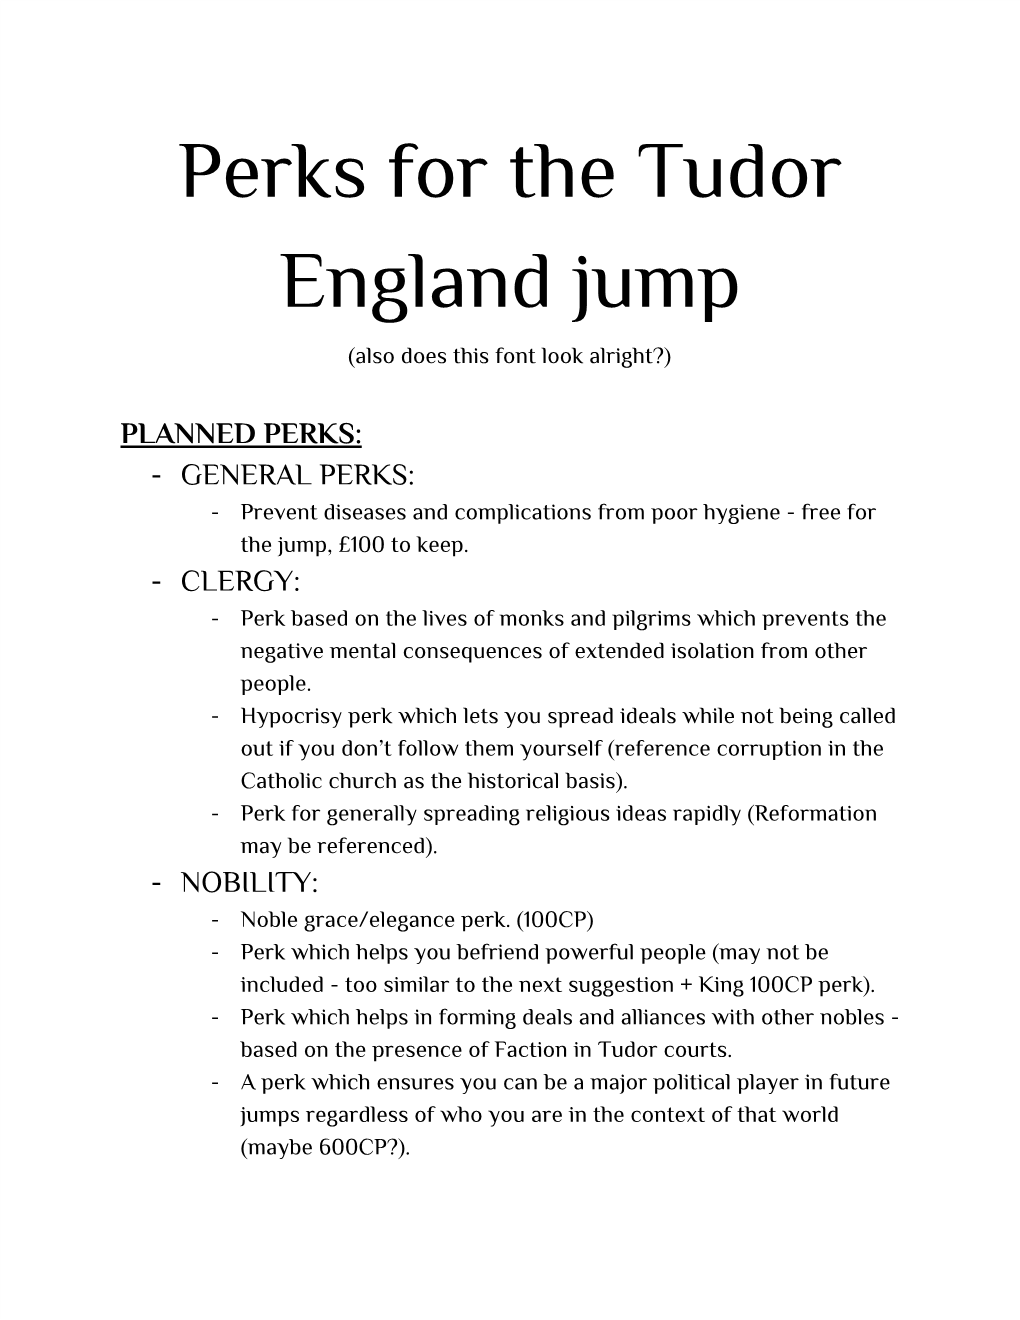 Perks for the Tudor England Jump (Also Does This Font Look Alright?)